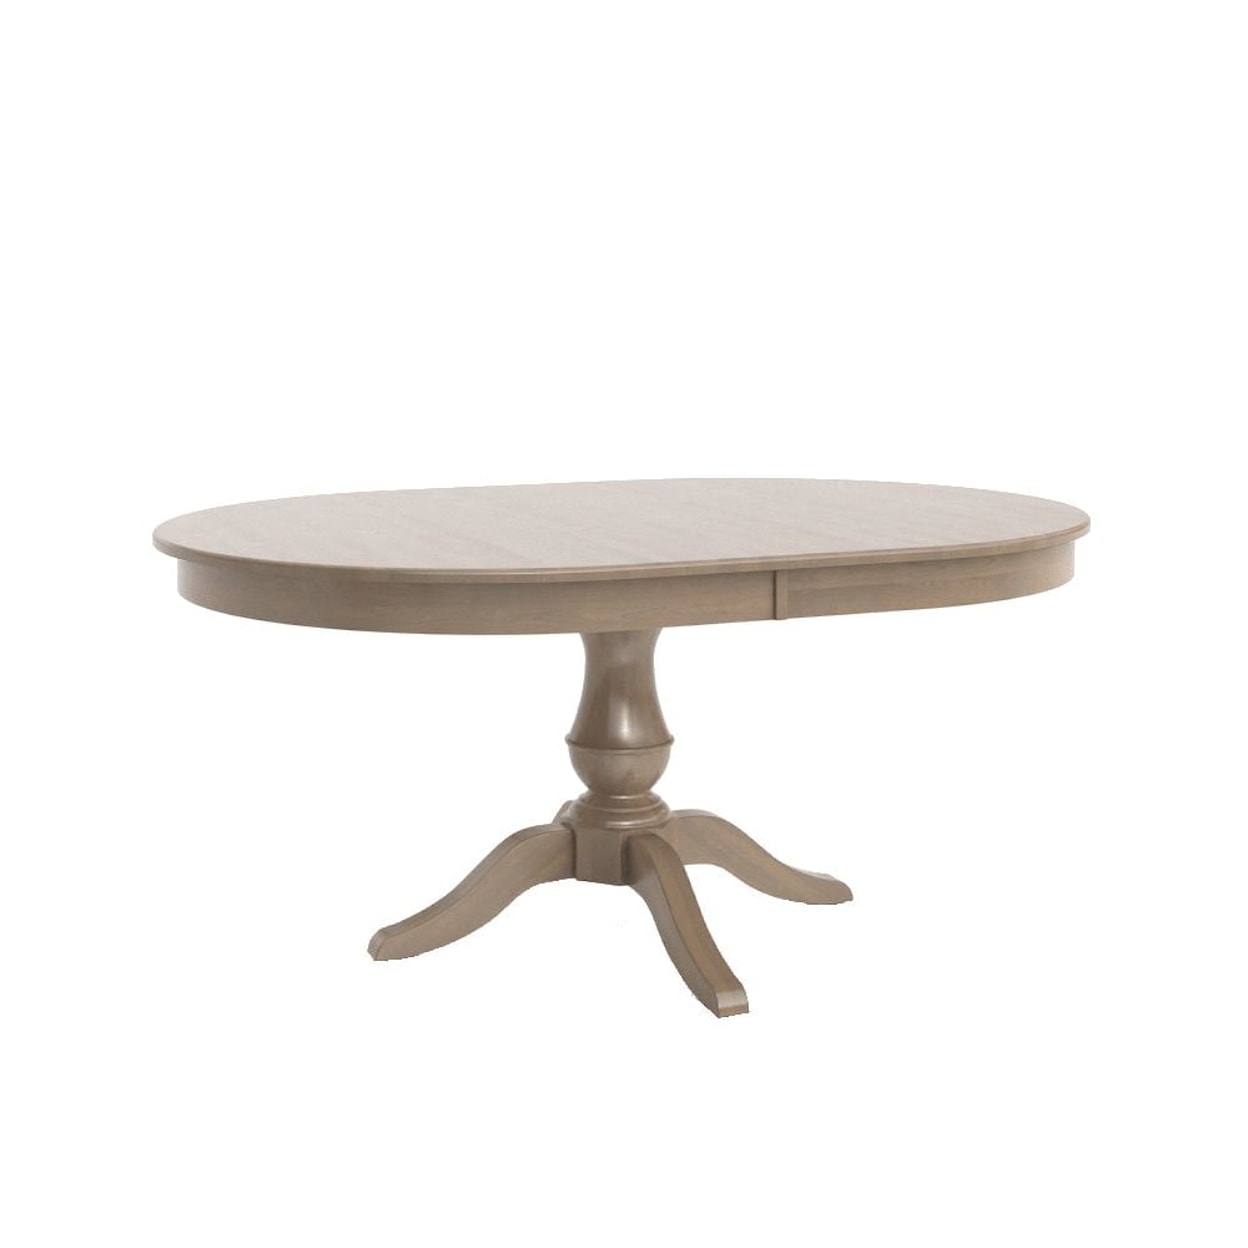 Canadel Gourmet Oval wood table